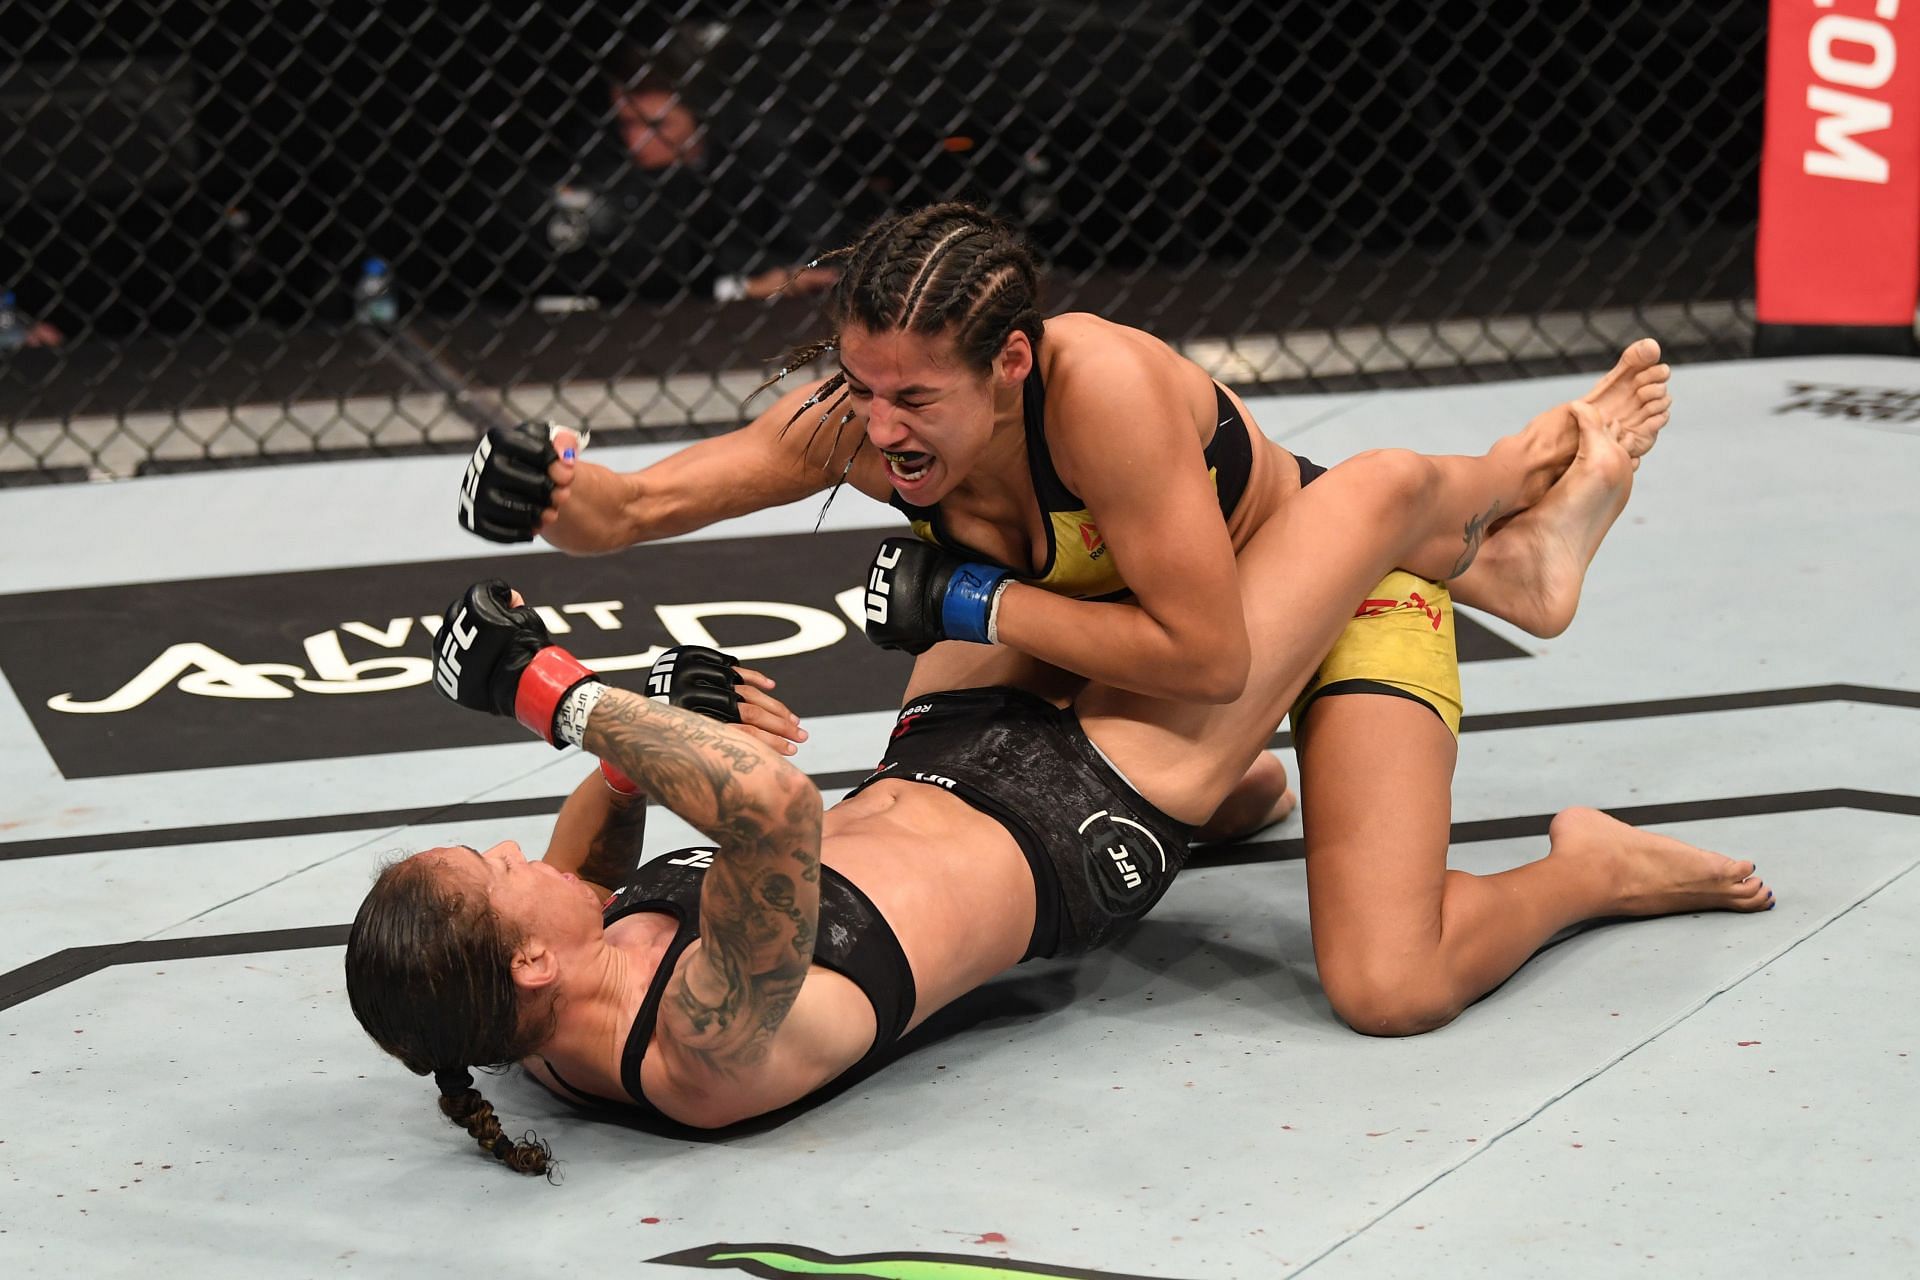 Could Julianna Pena be the fighter to dethrone the great Amanda Nunes?